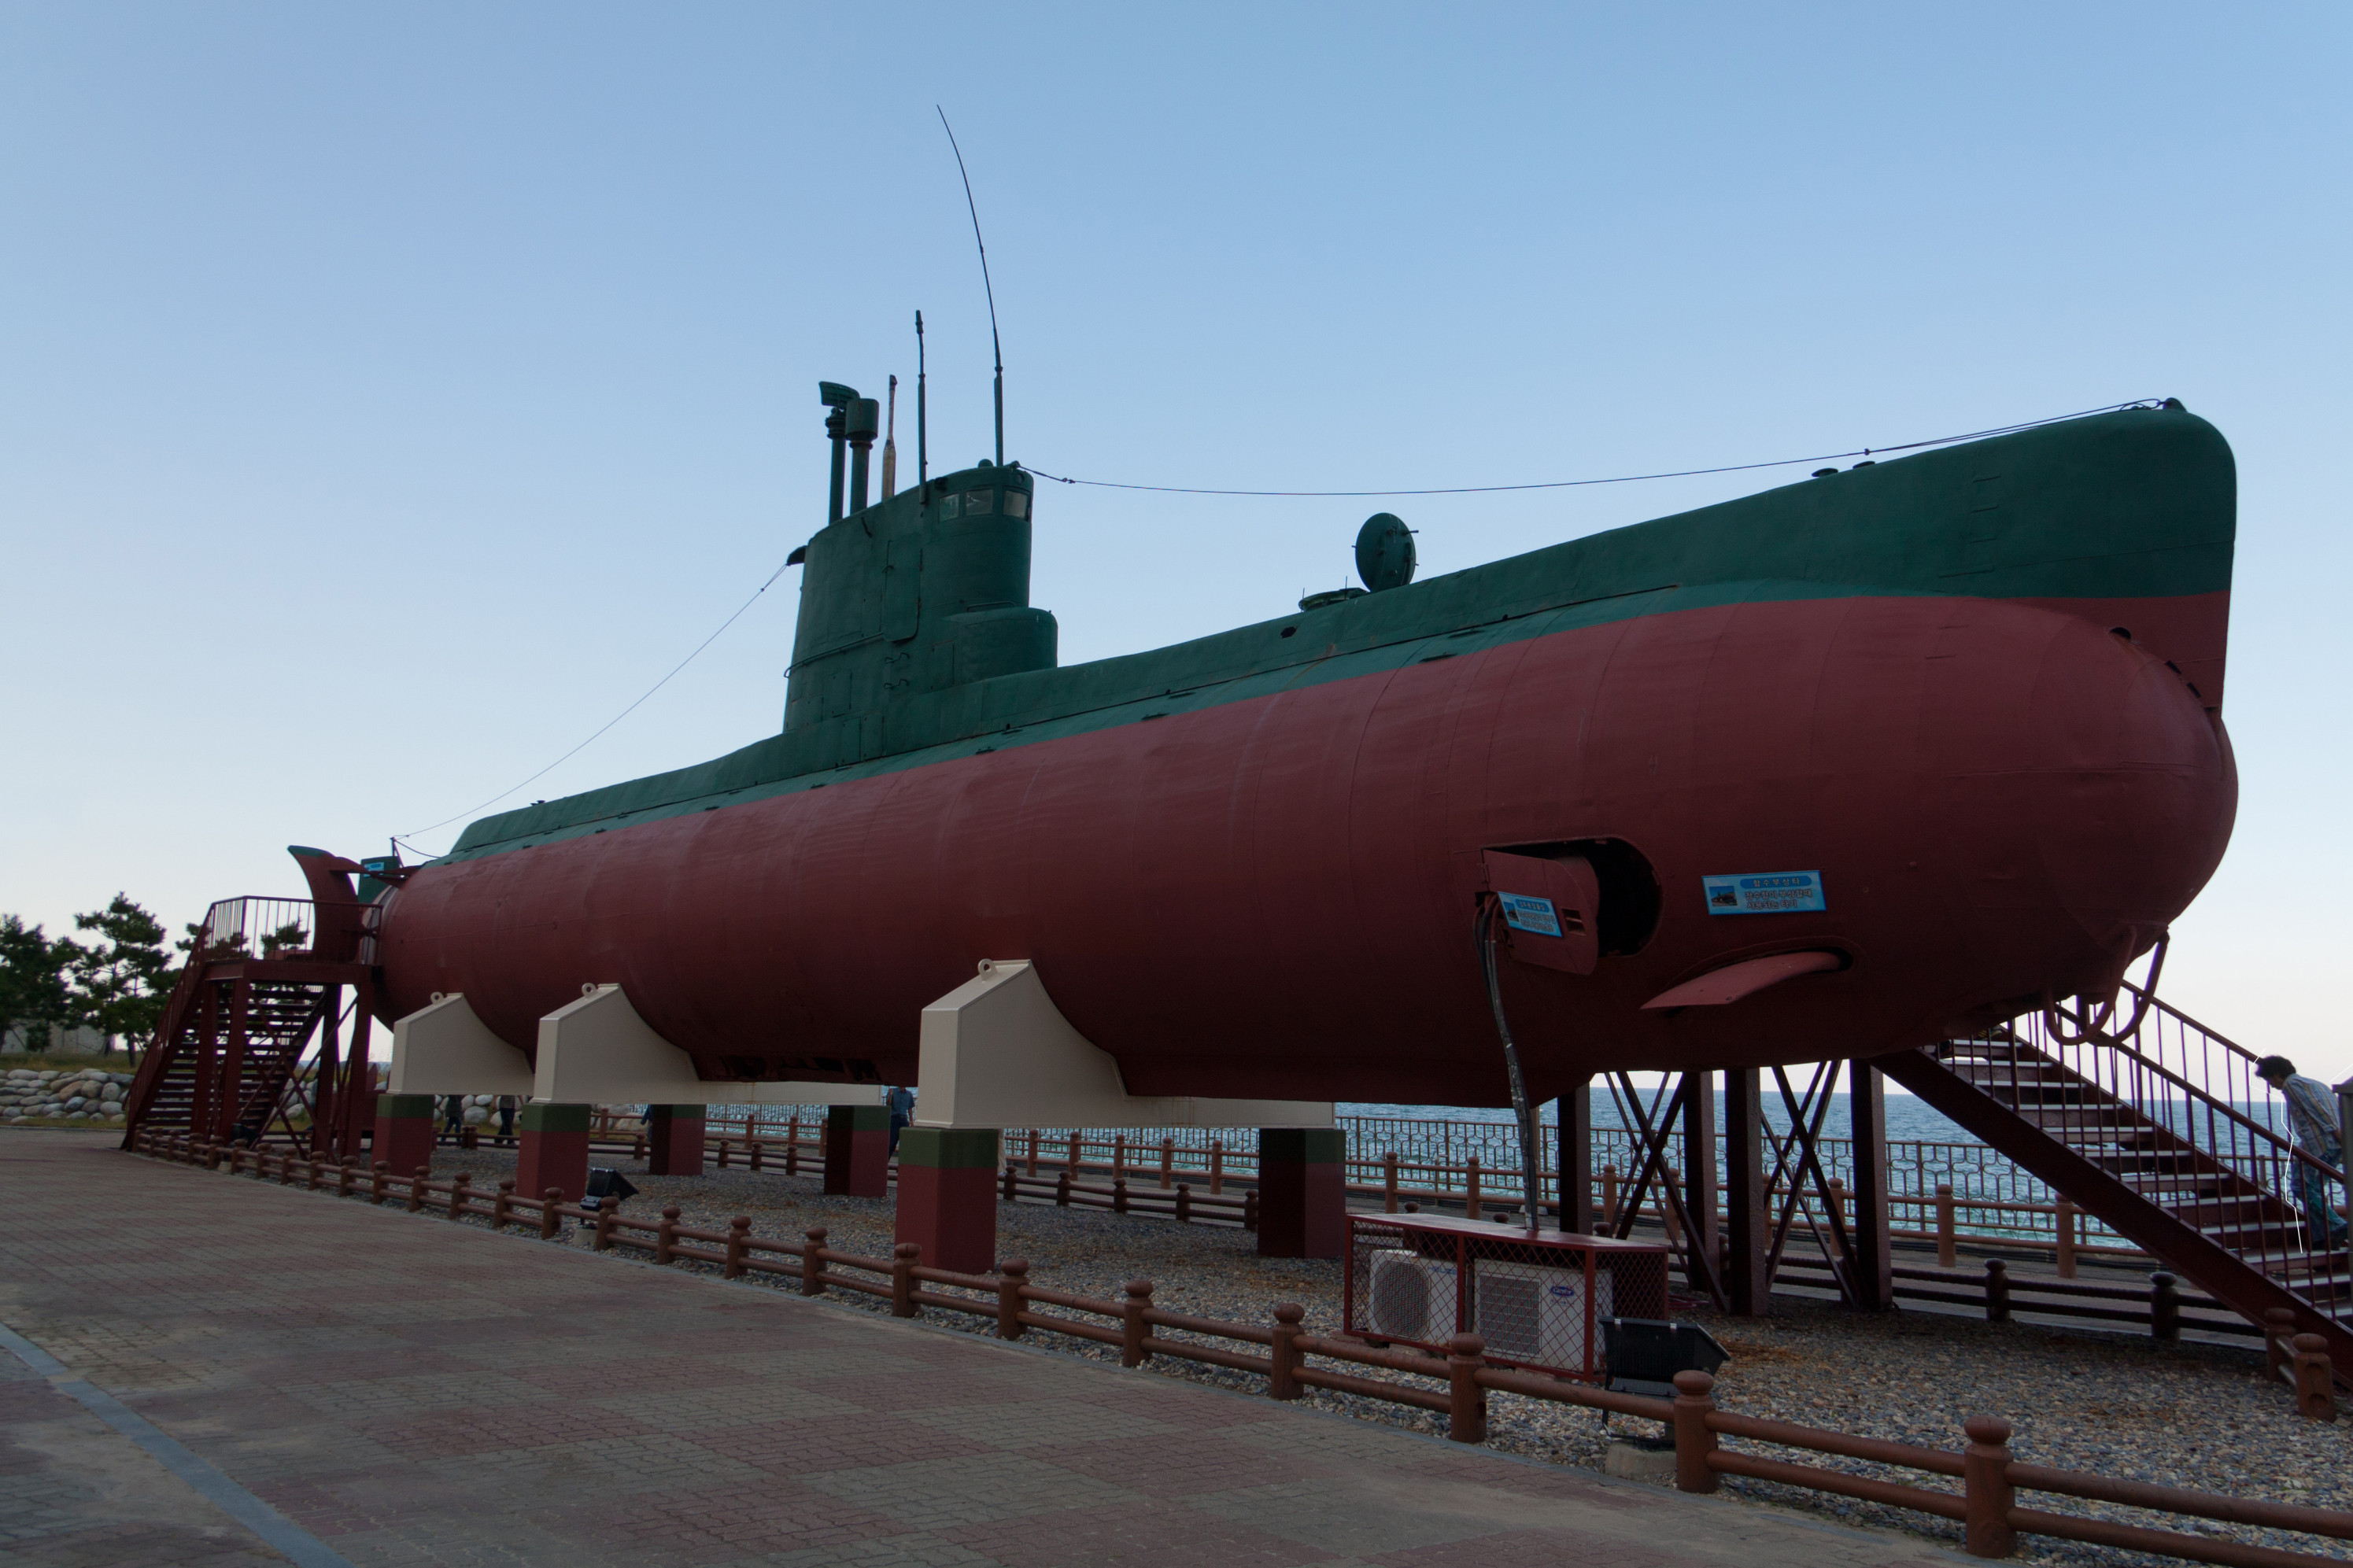 A “Sang-O” North Korean submarine, one of few images of North Korean submarine technology. This model differs from the supposedly nuclear-enabled design, however.